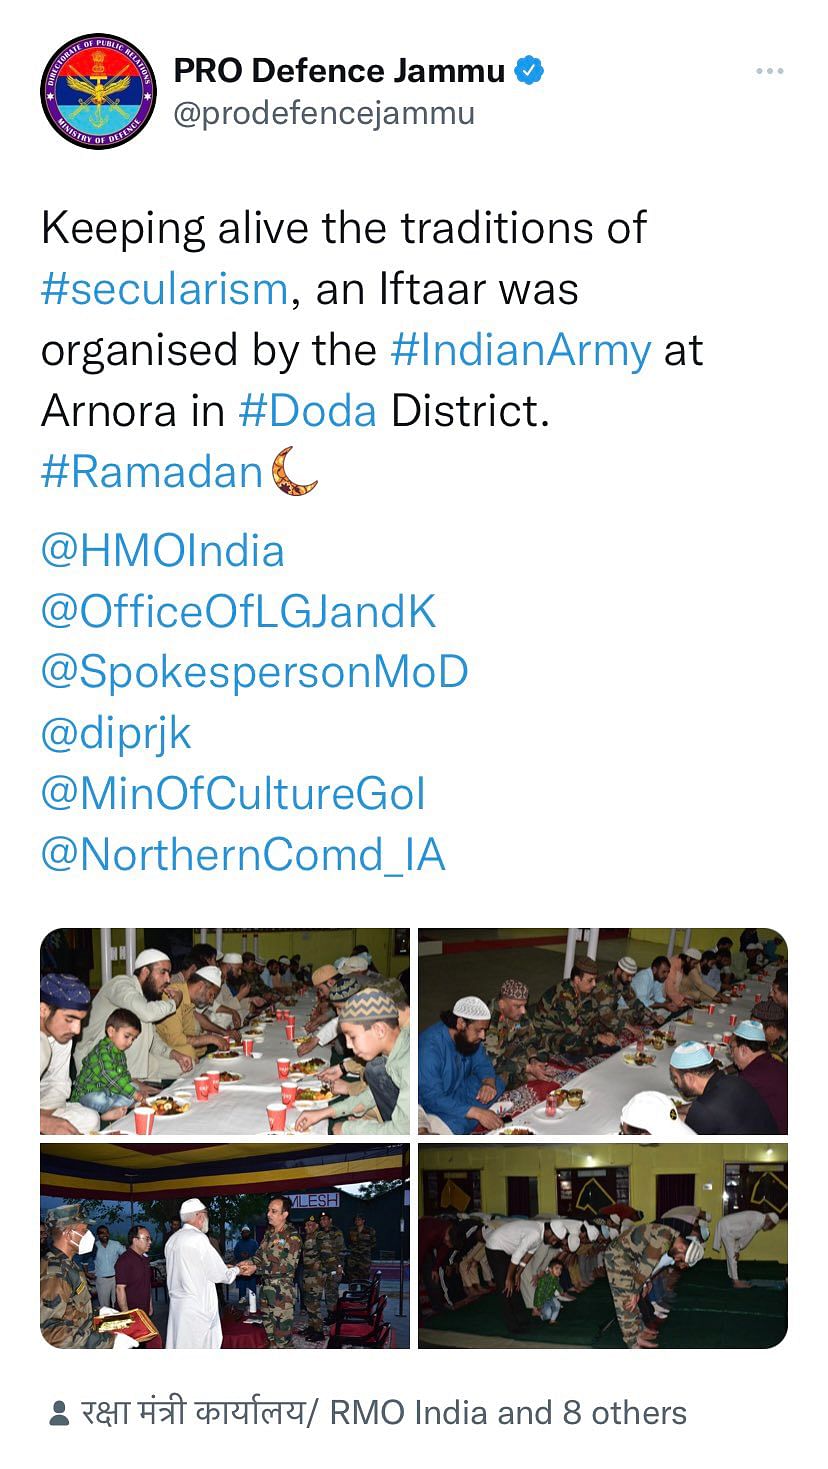 Pictures of Doda iftar shared using PRO Defence Jammu Twitter handle